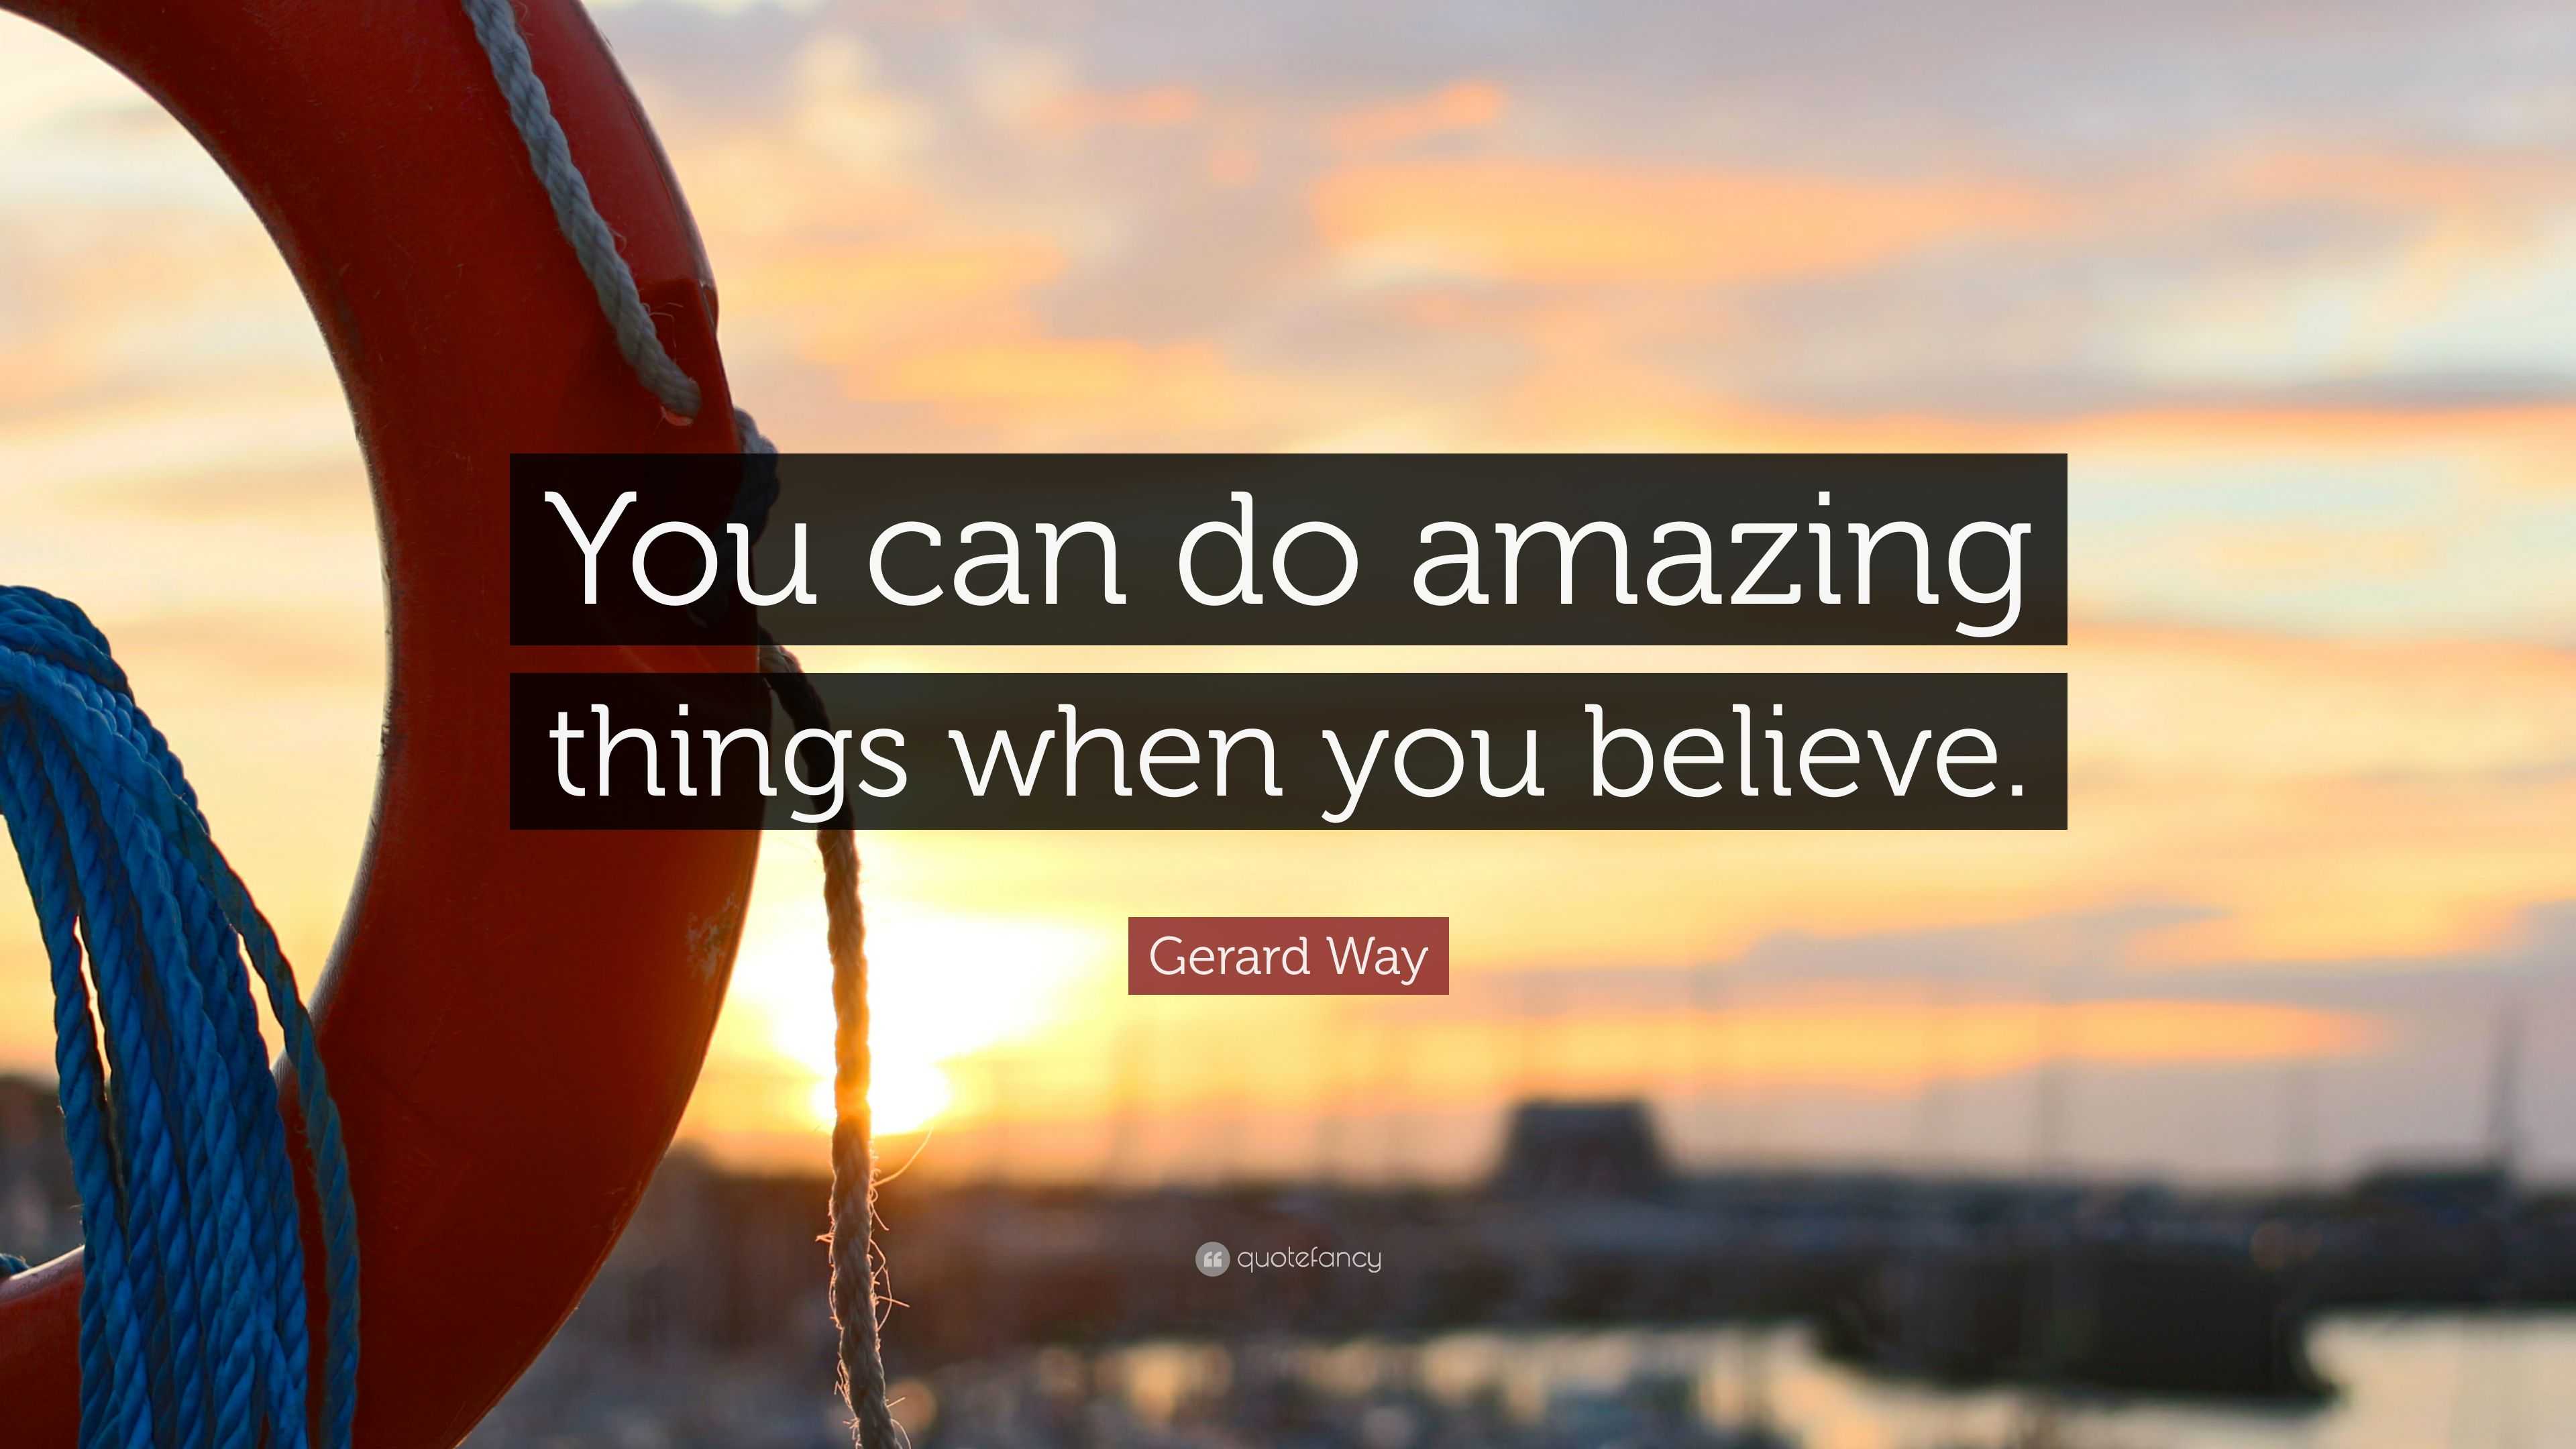 Gerard Way Quote: “You can do amazing things when you believe.” (9